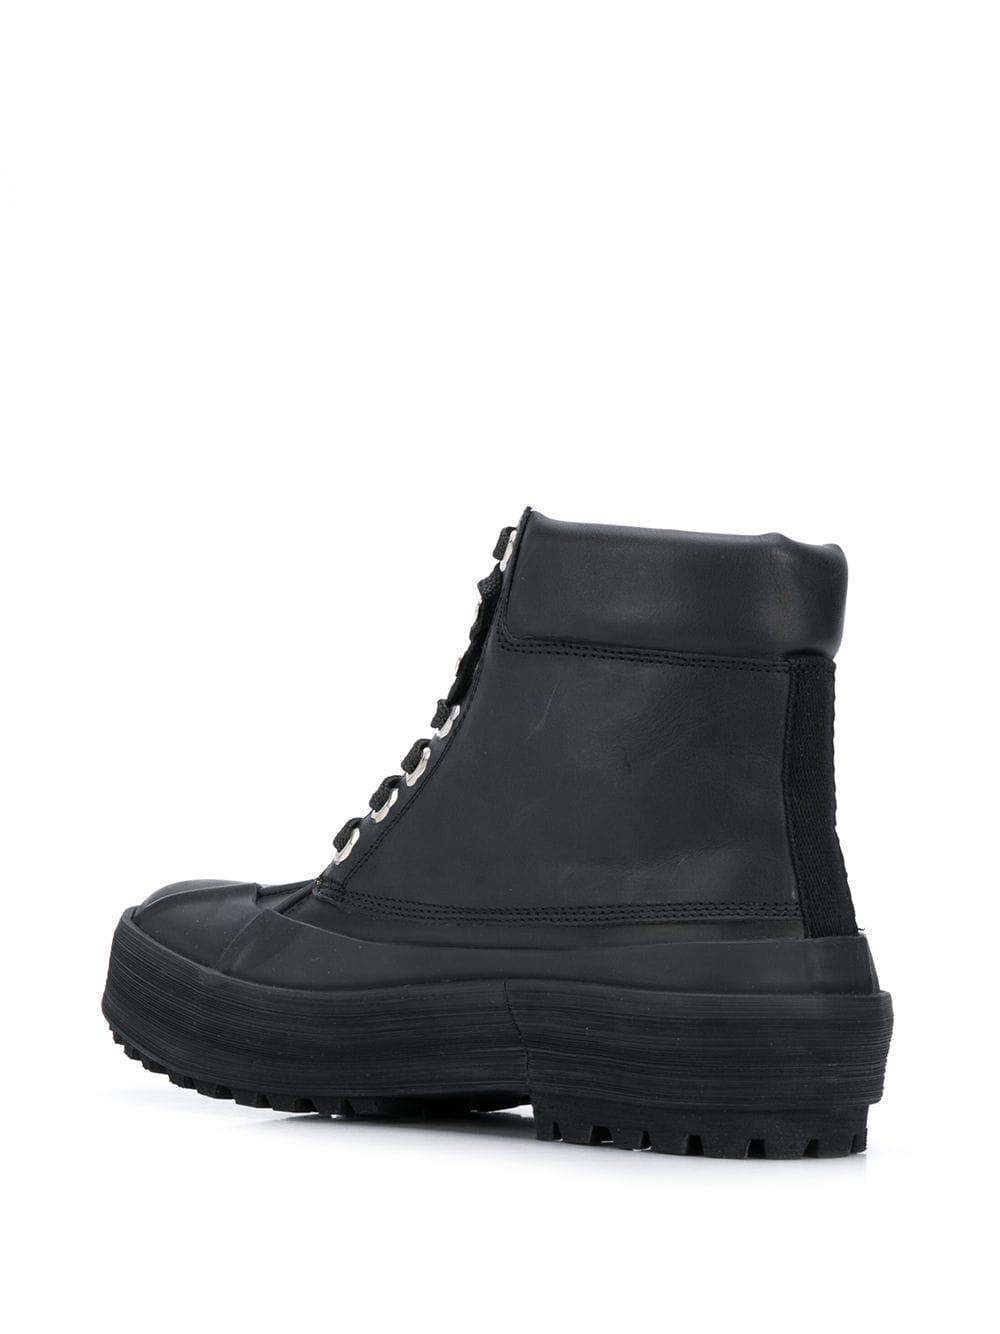 Jacquemus Leather Les Meuniers Mountain Boots in Black - Lyst